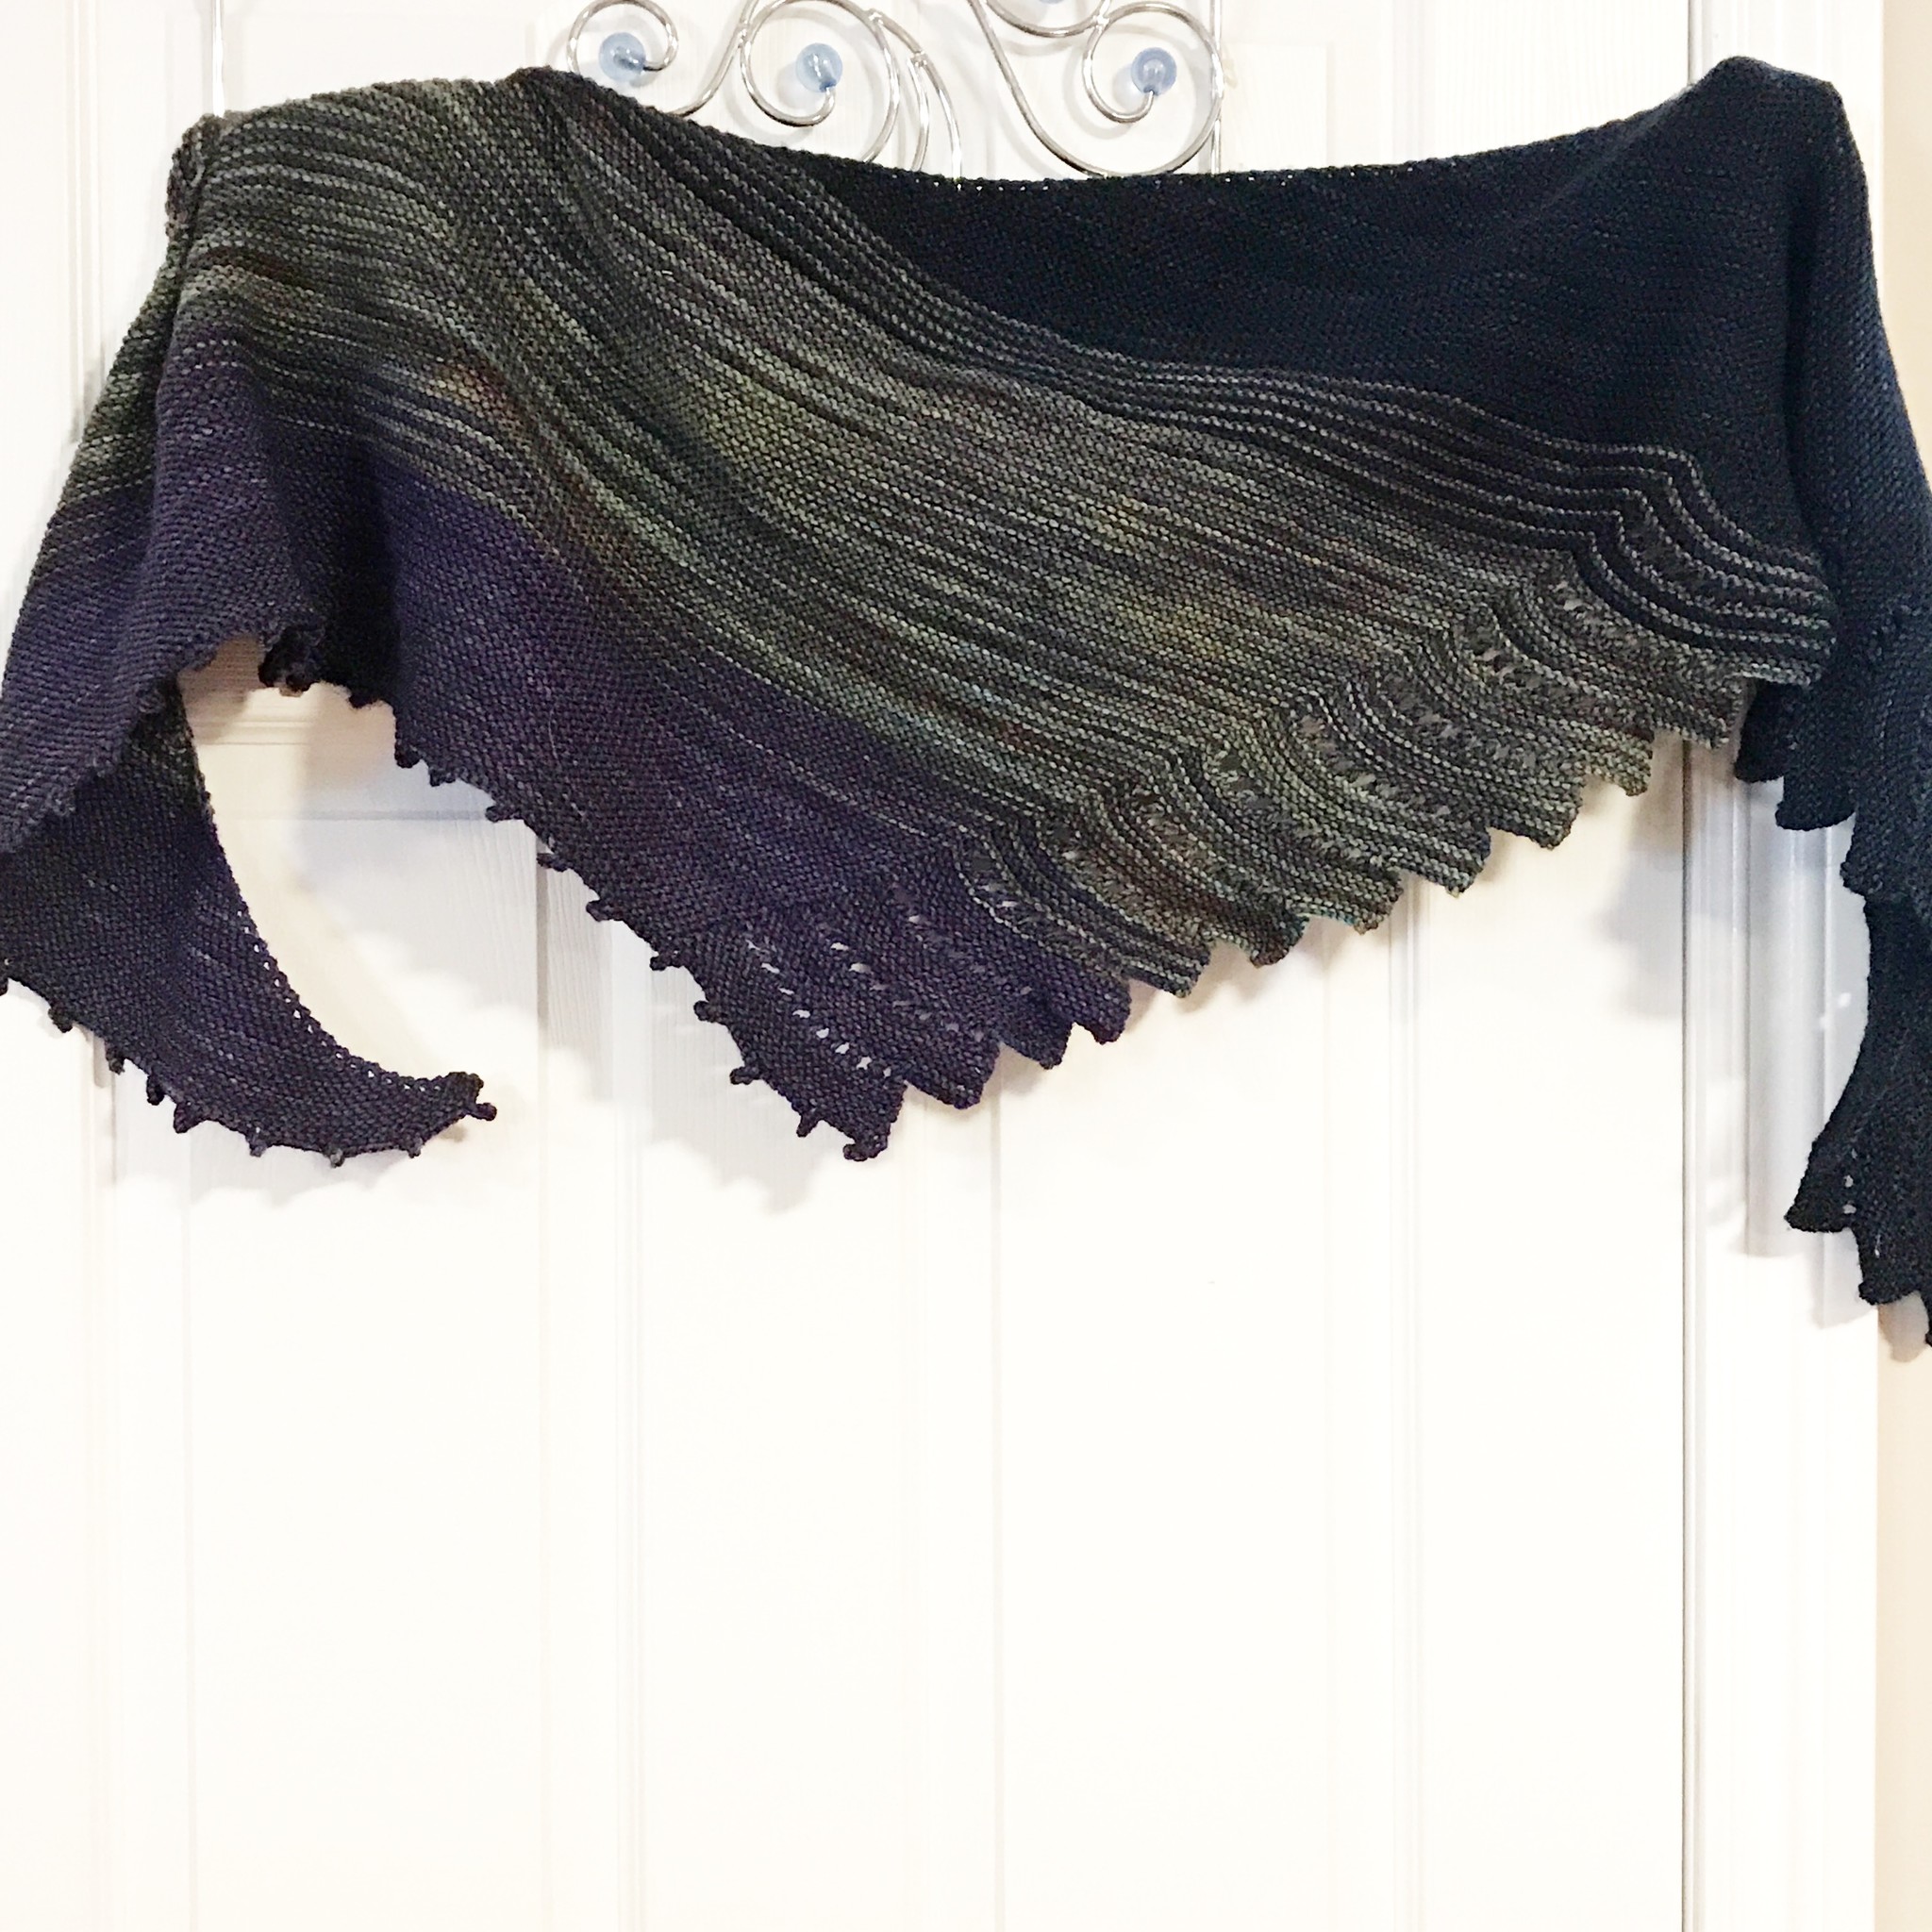 carlaeleanor's Close to You Shawl